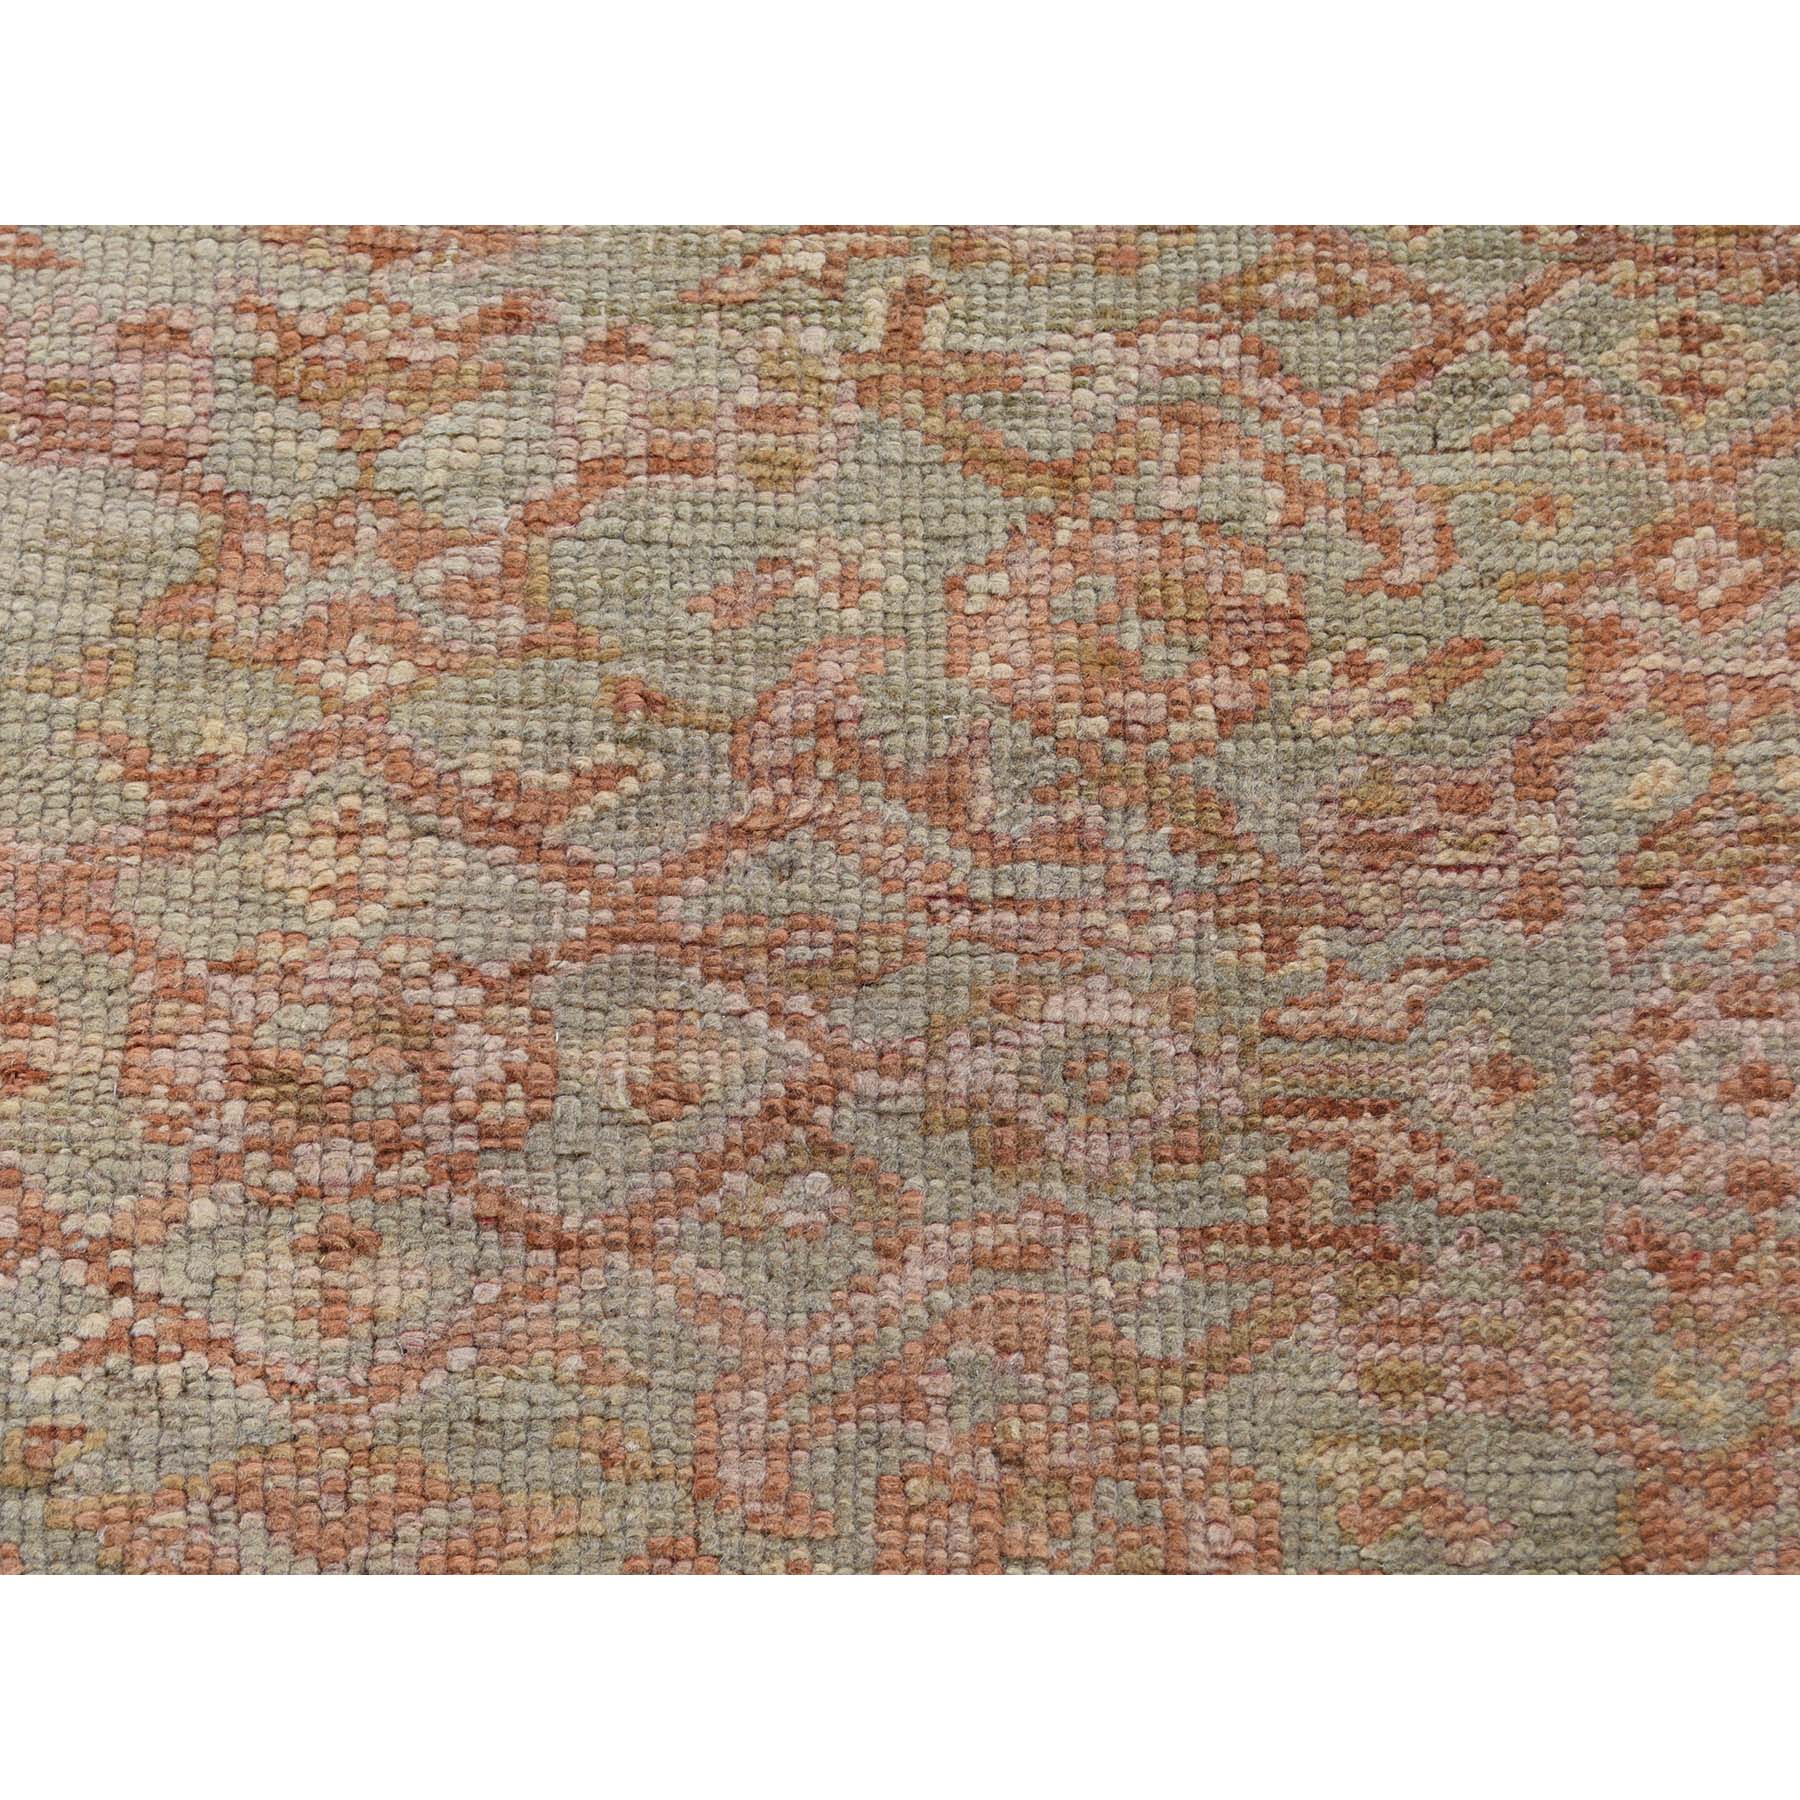 10'10"x15'3" Cinnamon and Green Oversized Antique Turkish Oushak Exc Condition Pure Wool Hand Woven Oriental Rug 